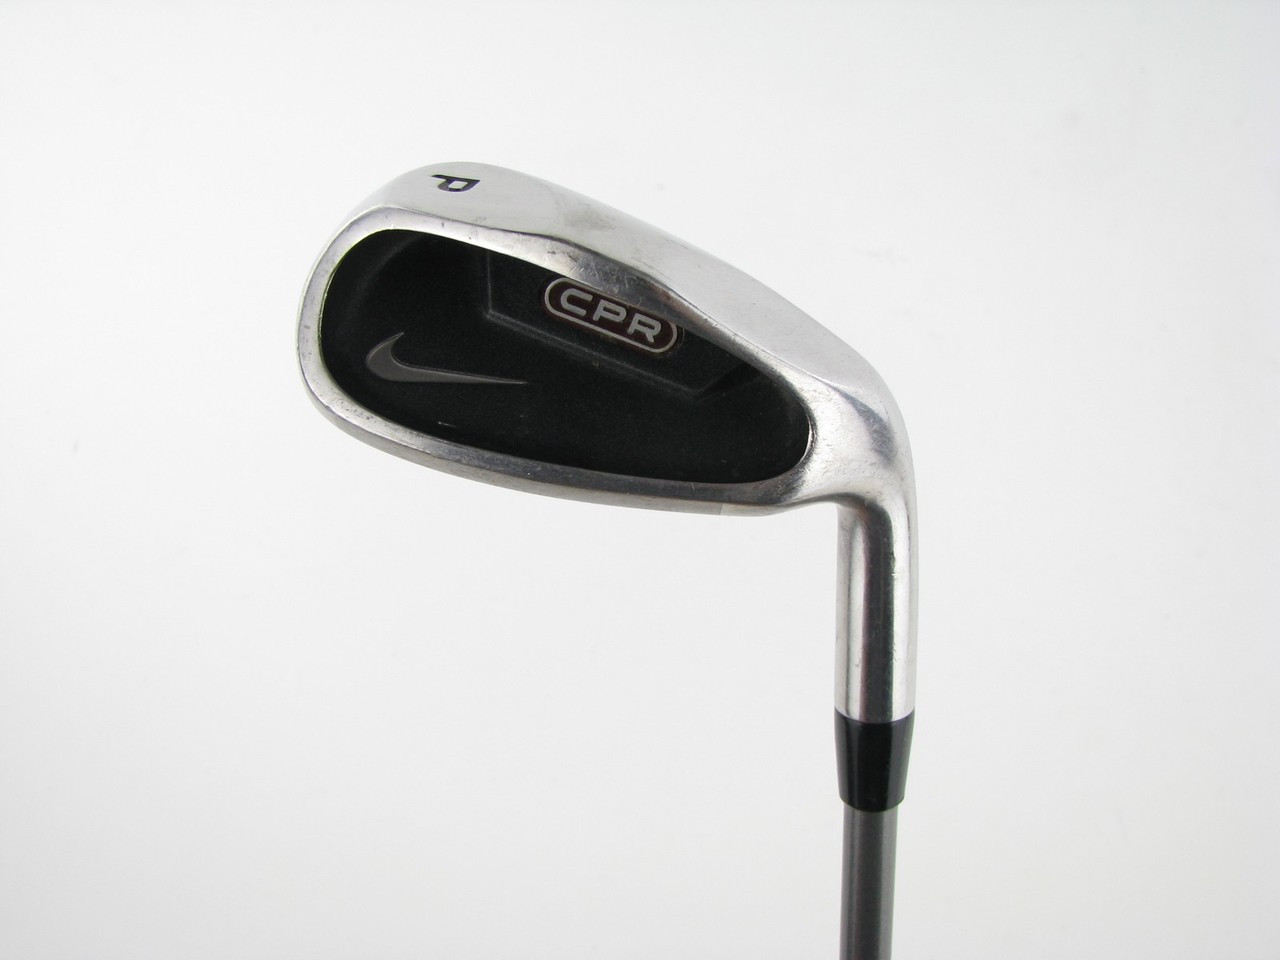 Bestrating Leuk vinden Intentie Nike CPR 2 Hybrid Pitching Wedge w/ Graphite Regular (Out of Stock) - Clubs  n Covers Golf